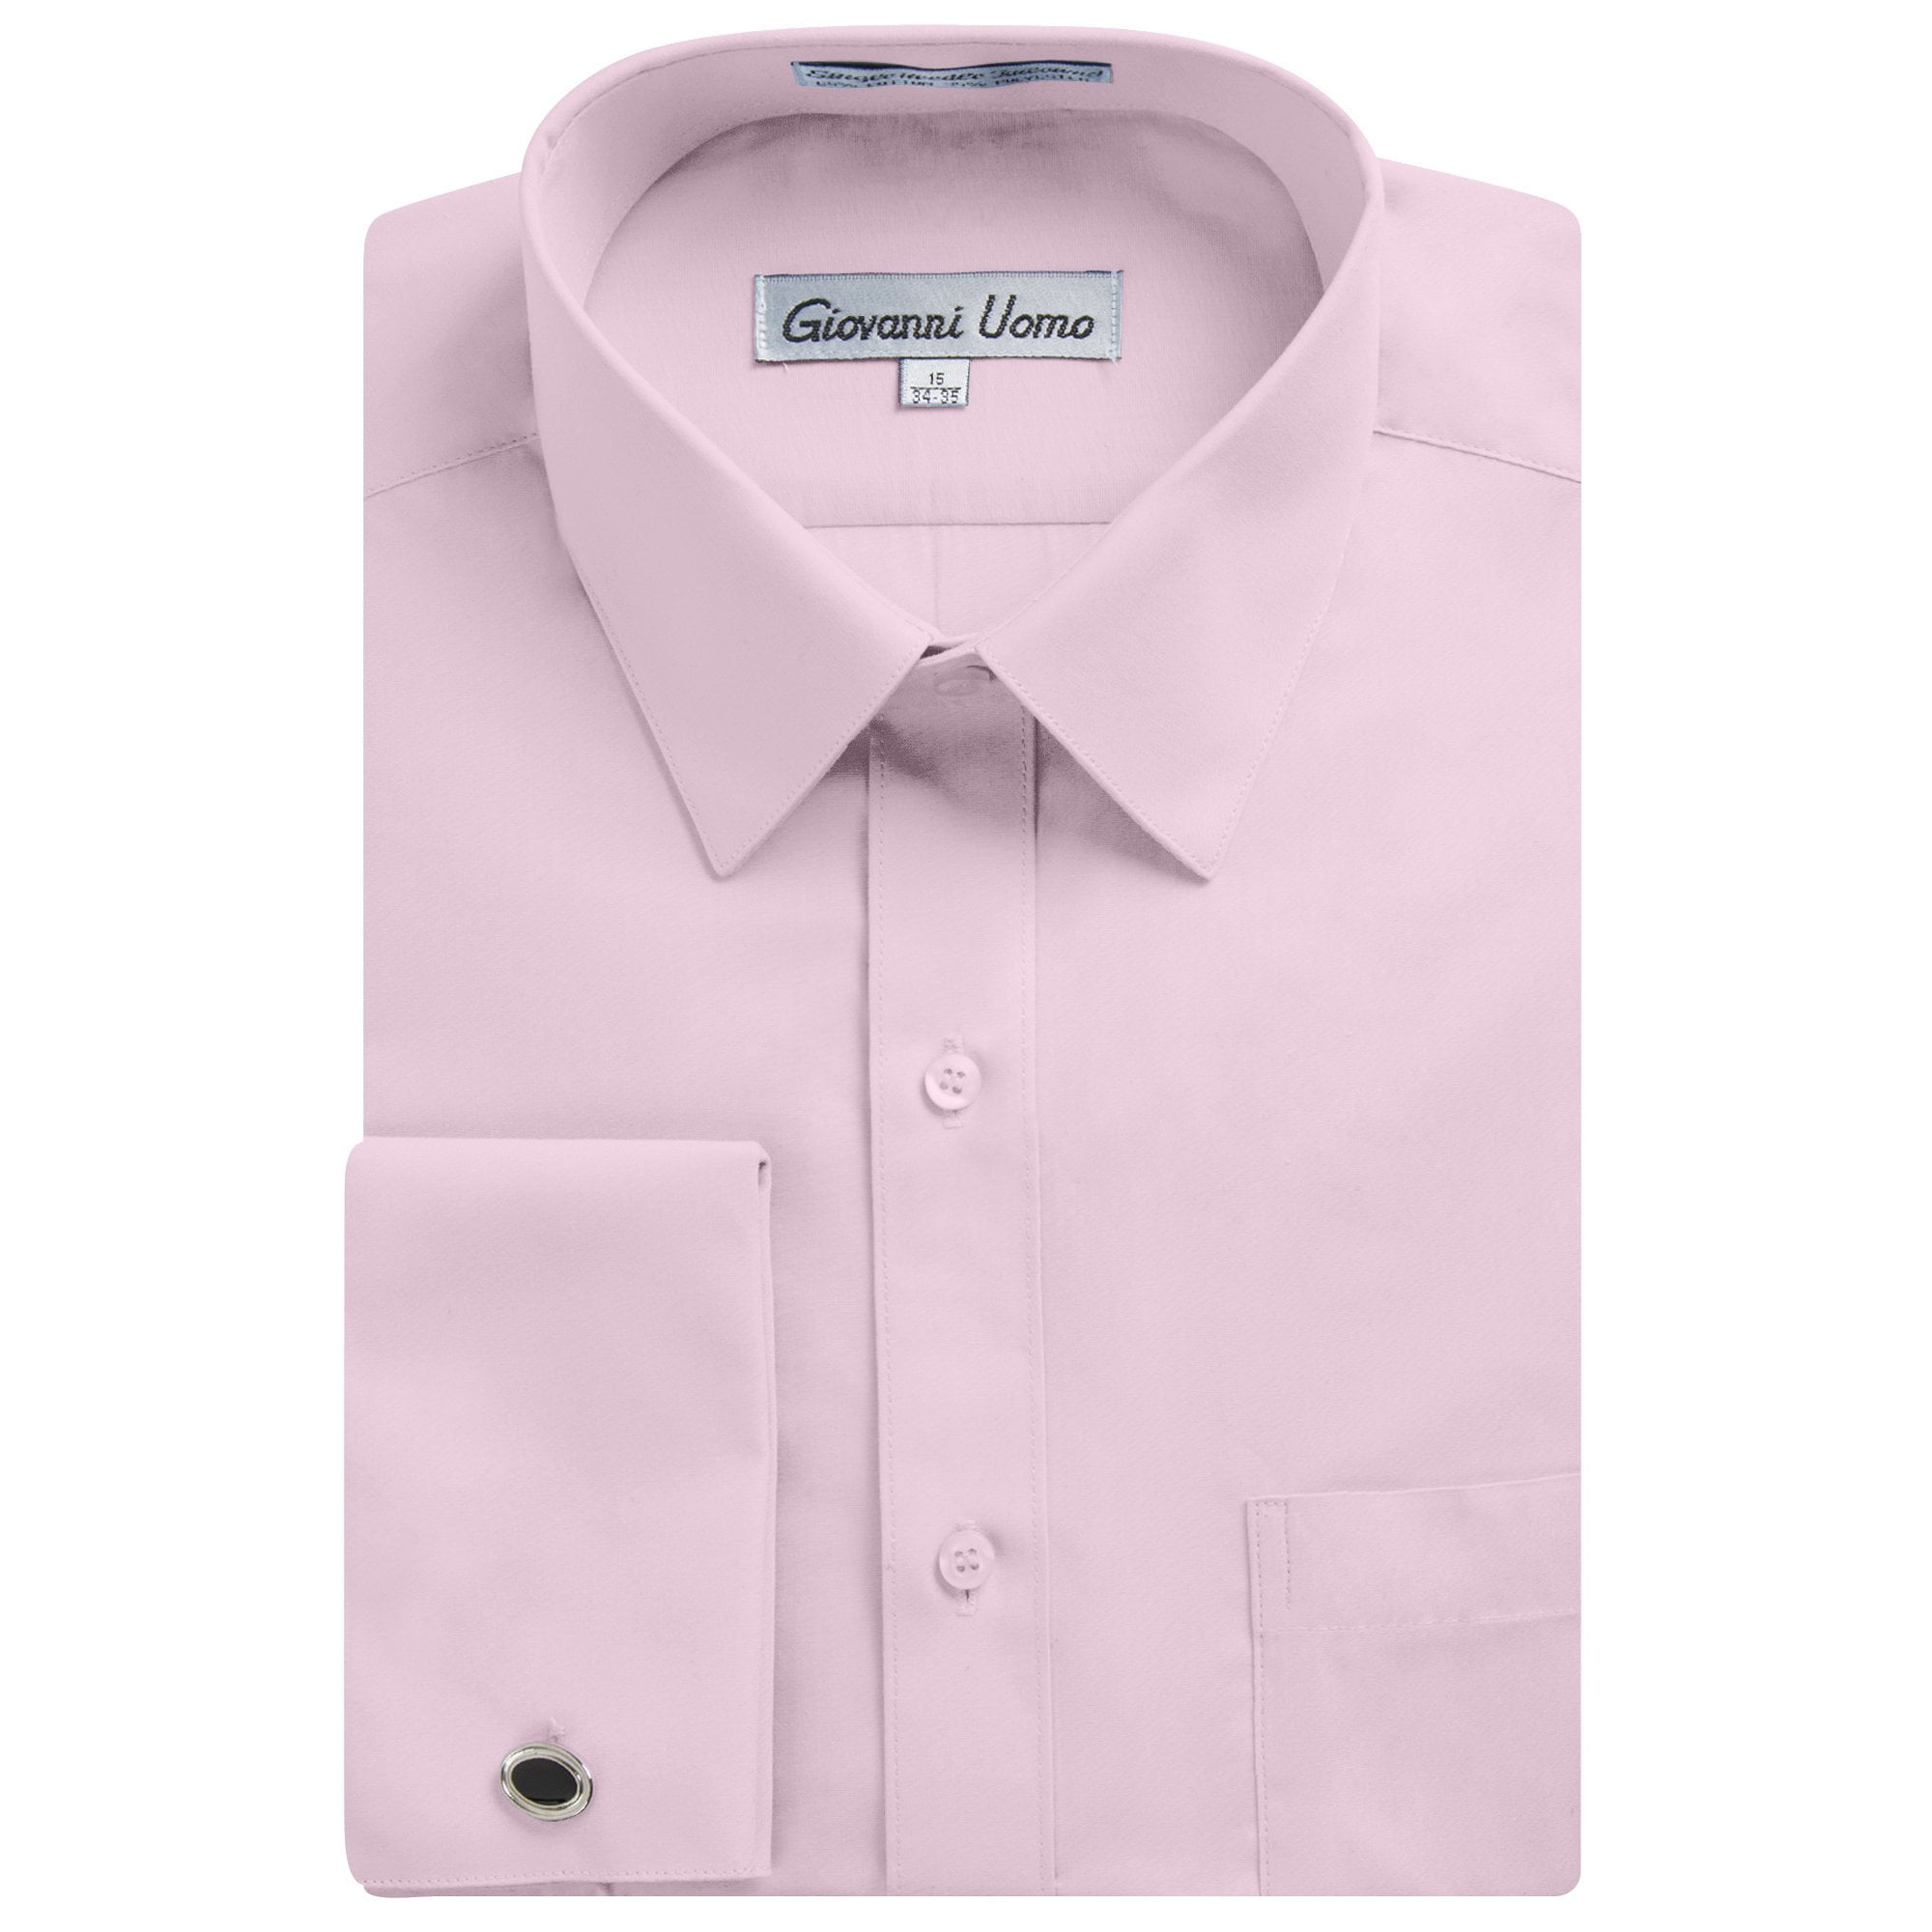 Gentlemens Collection Men's 1916FC French Cuff Solid Dress Shirt - Pink ...